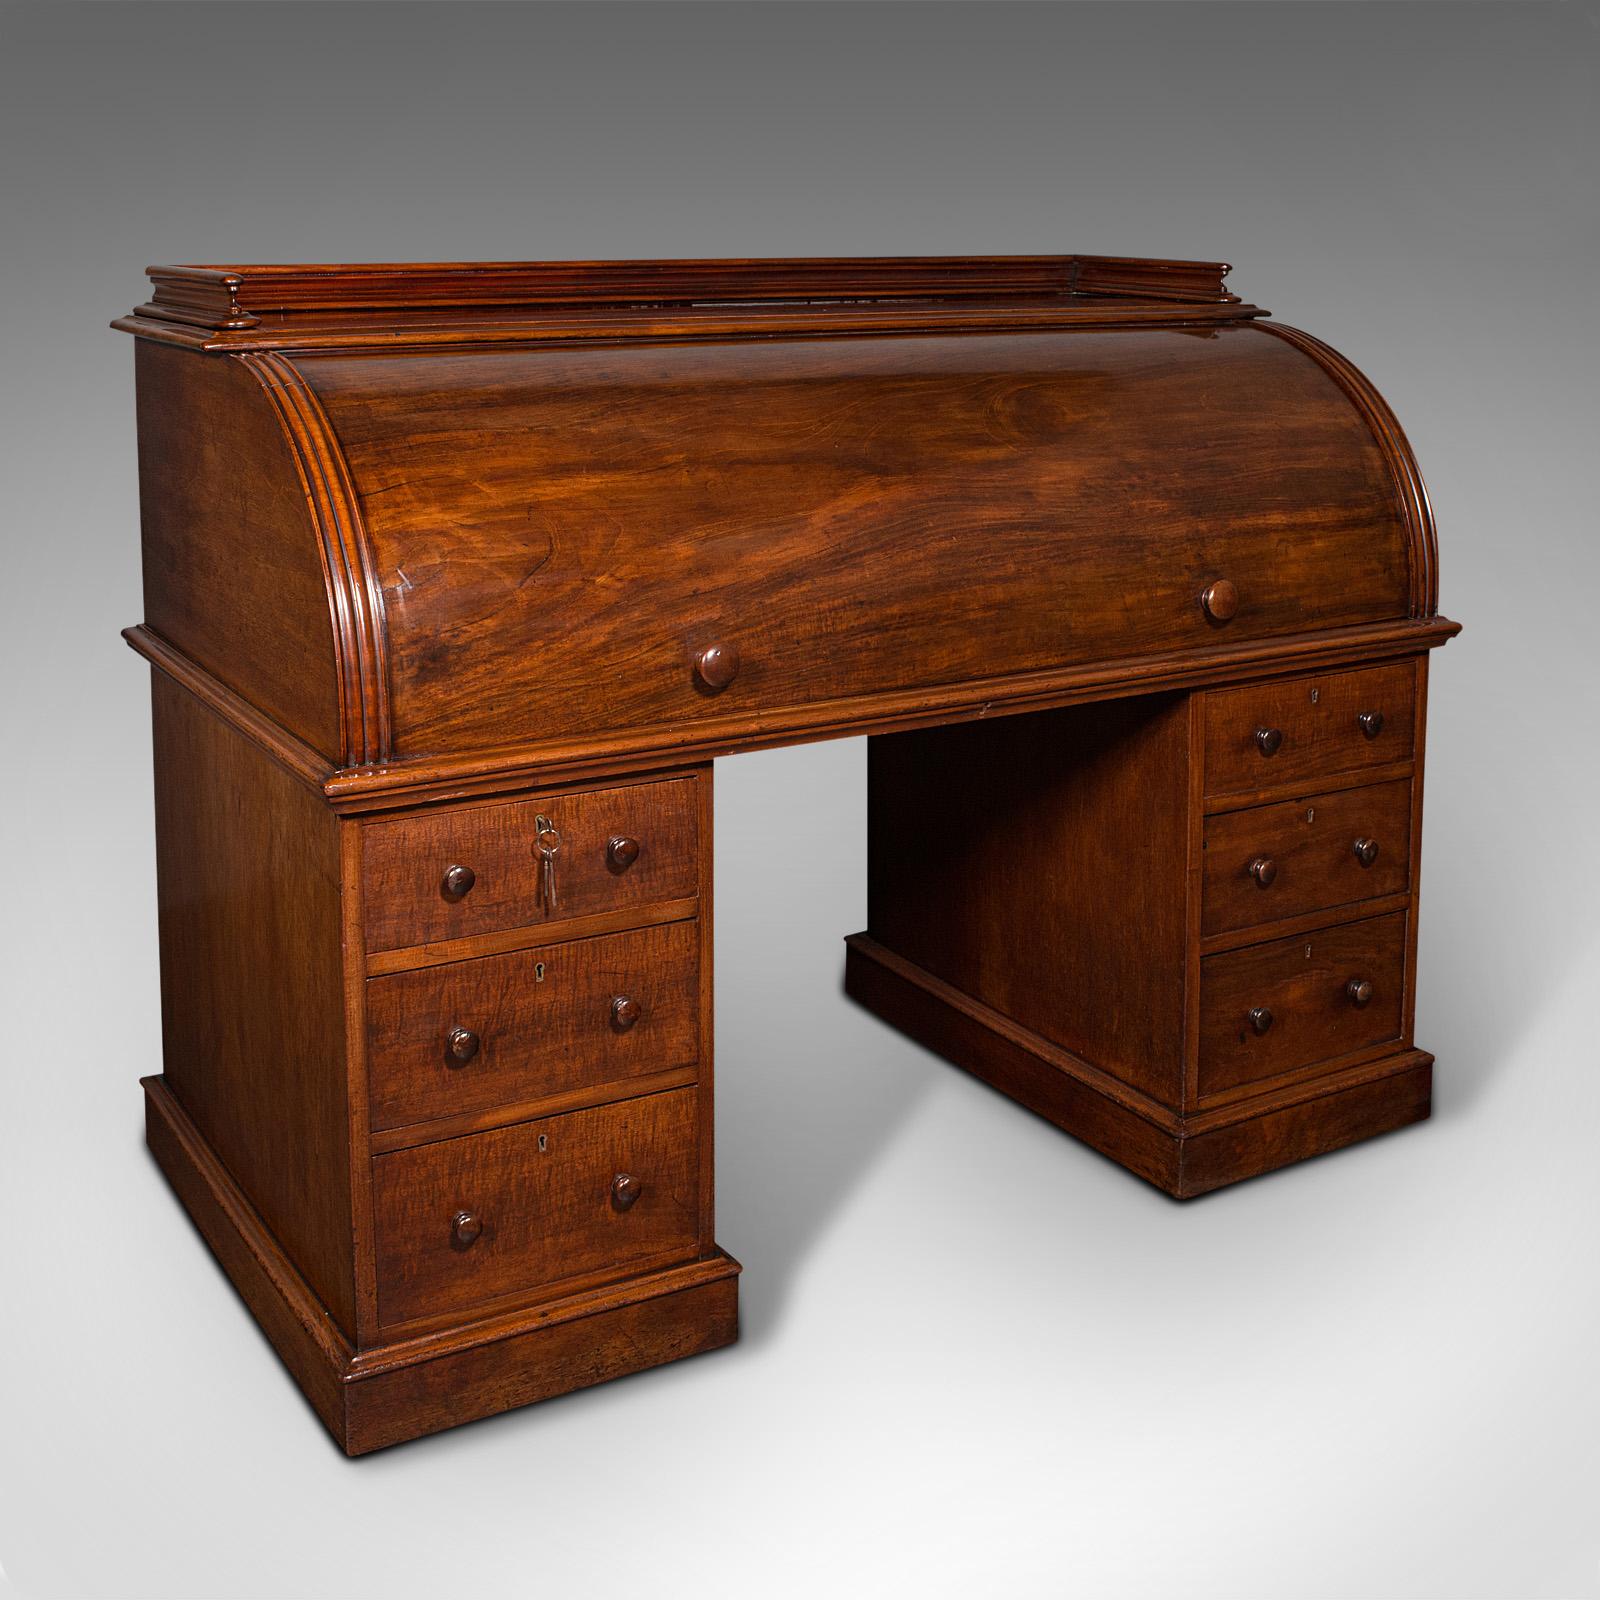 This is a grand antique estate pedestal desk. An English, quality mahogany and satinwood roll-top secretaire desk, dating to the mid Victorian period, circa 1860.

A desk of superior craftsmanship and proportion, with strong country estate